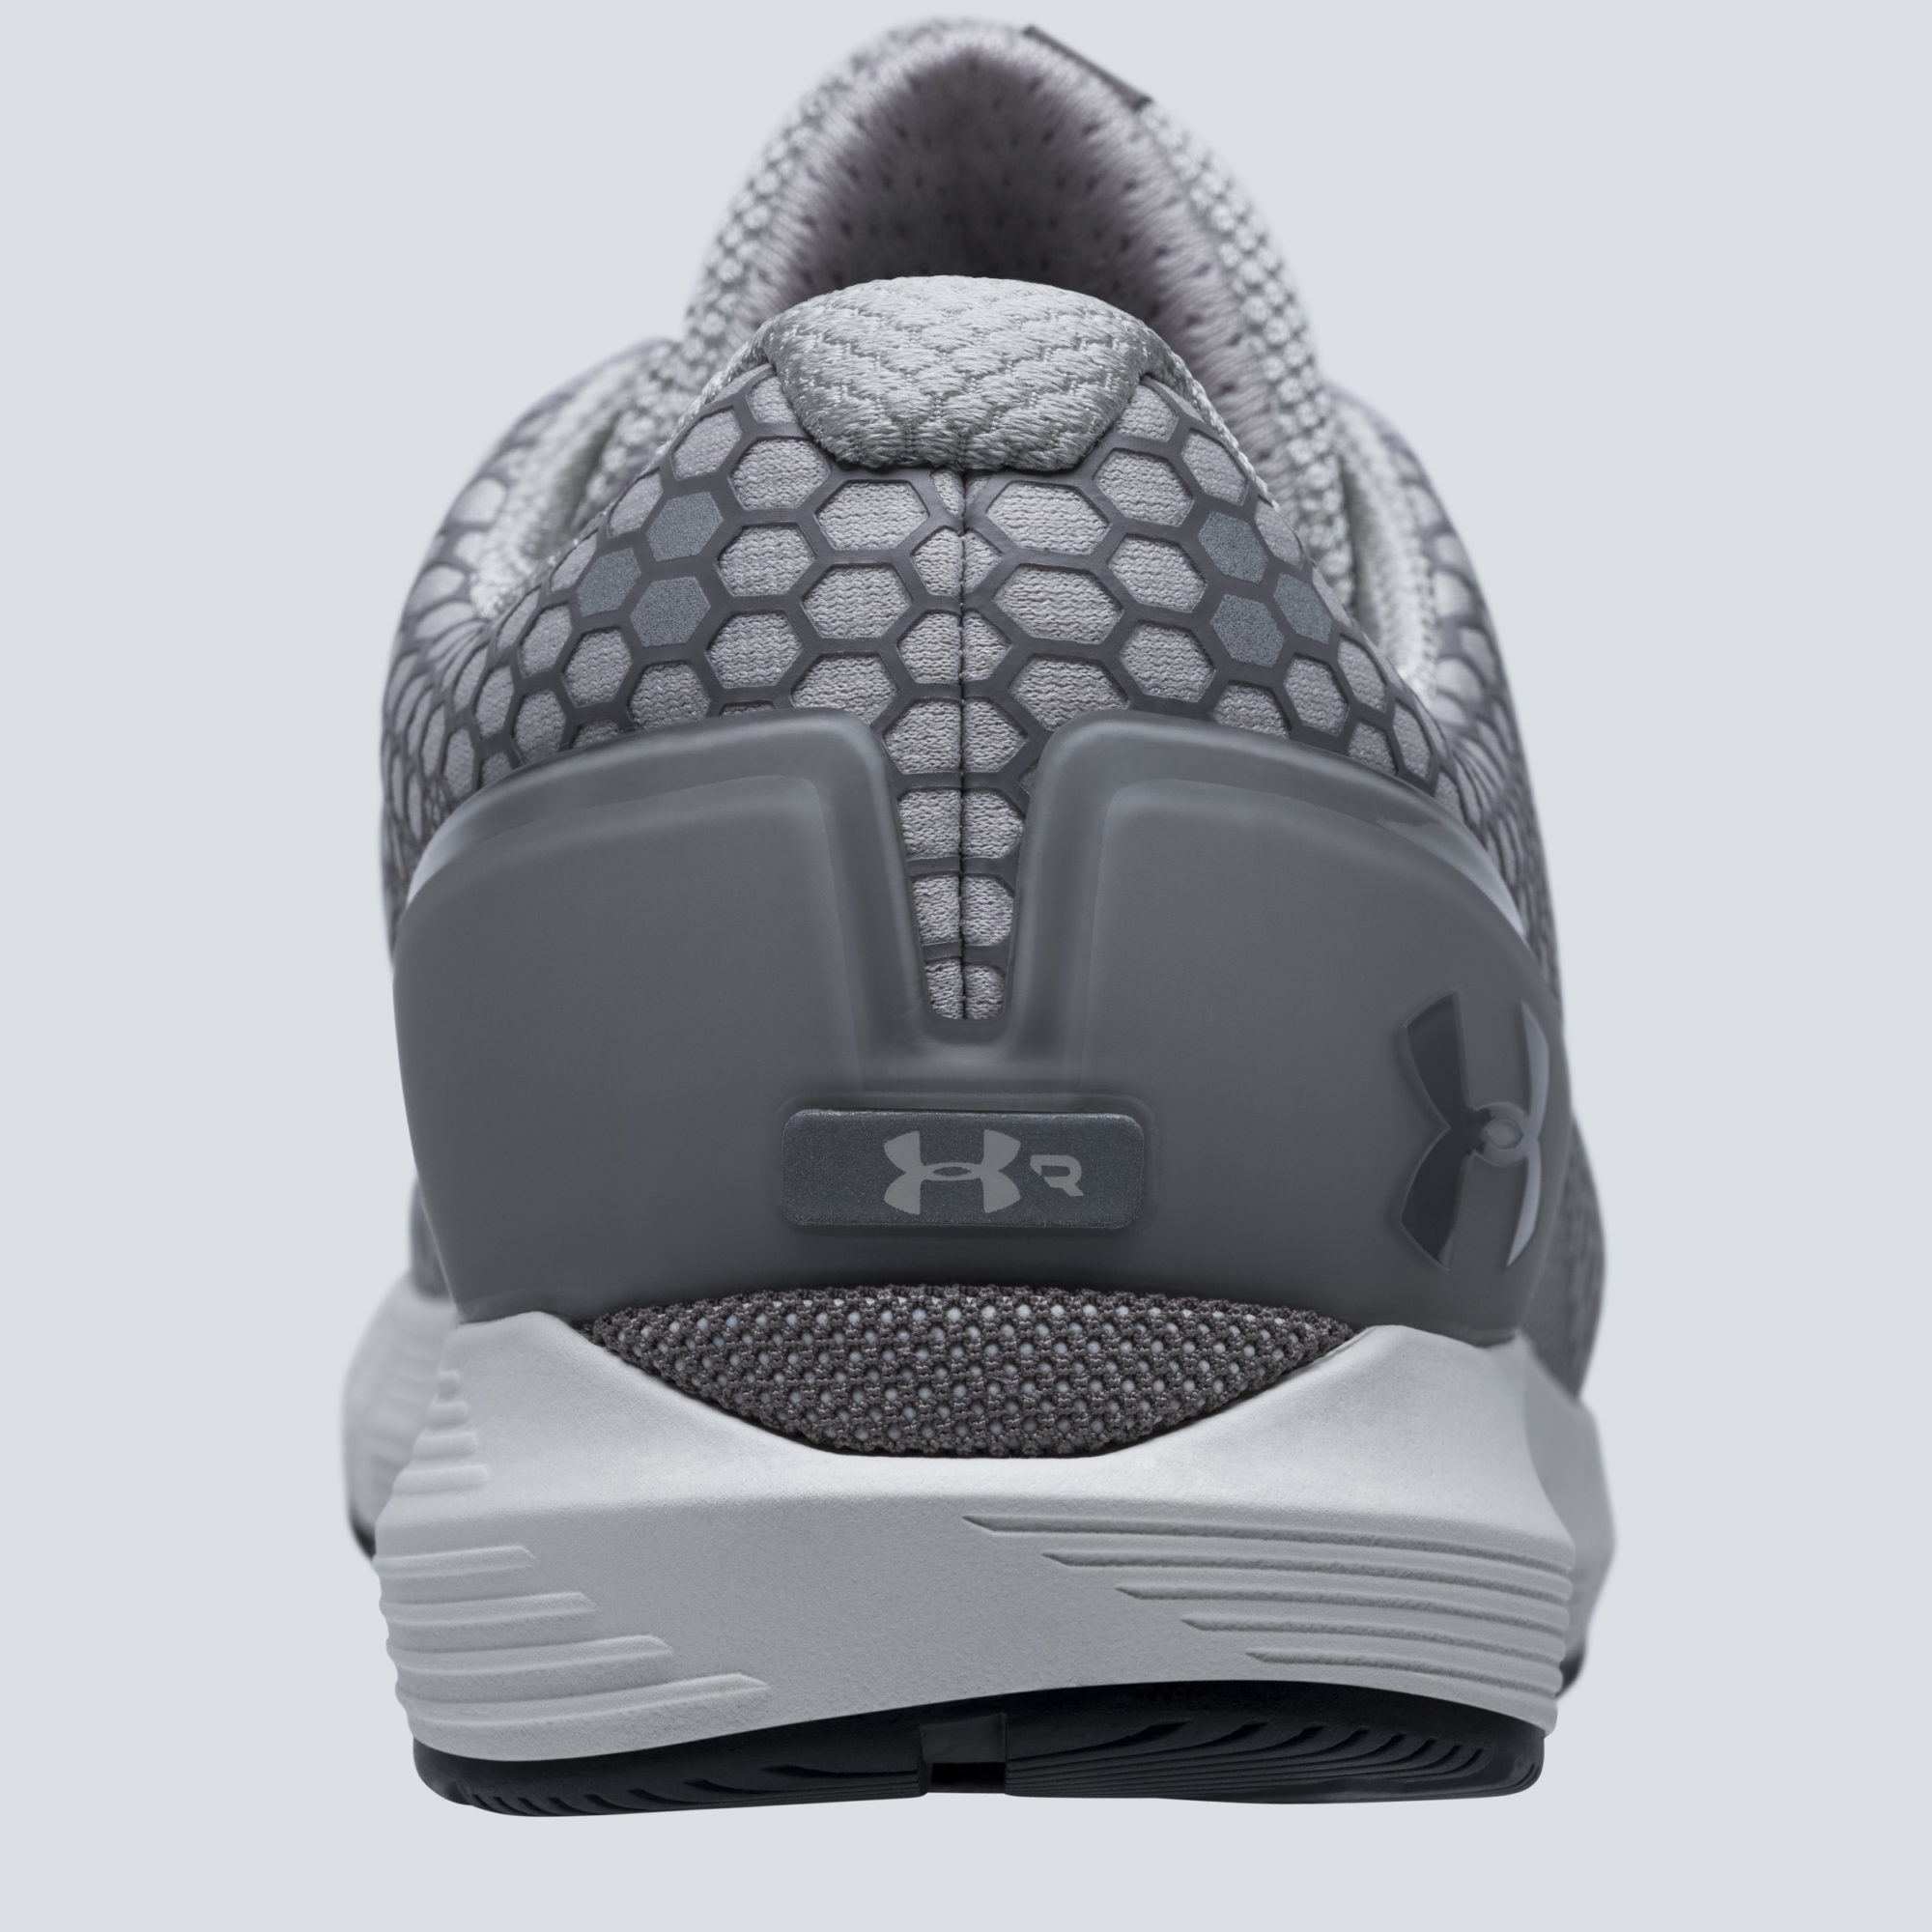 UA HOVR Coldgear Reactor with Michelin soles for winter runners - The Pill  Outdoor Journal